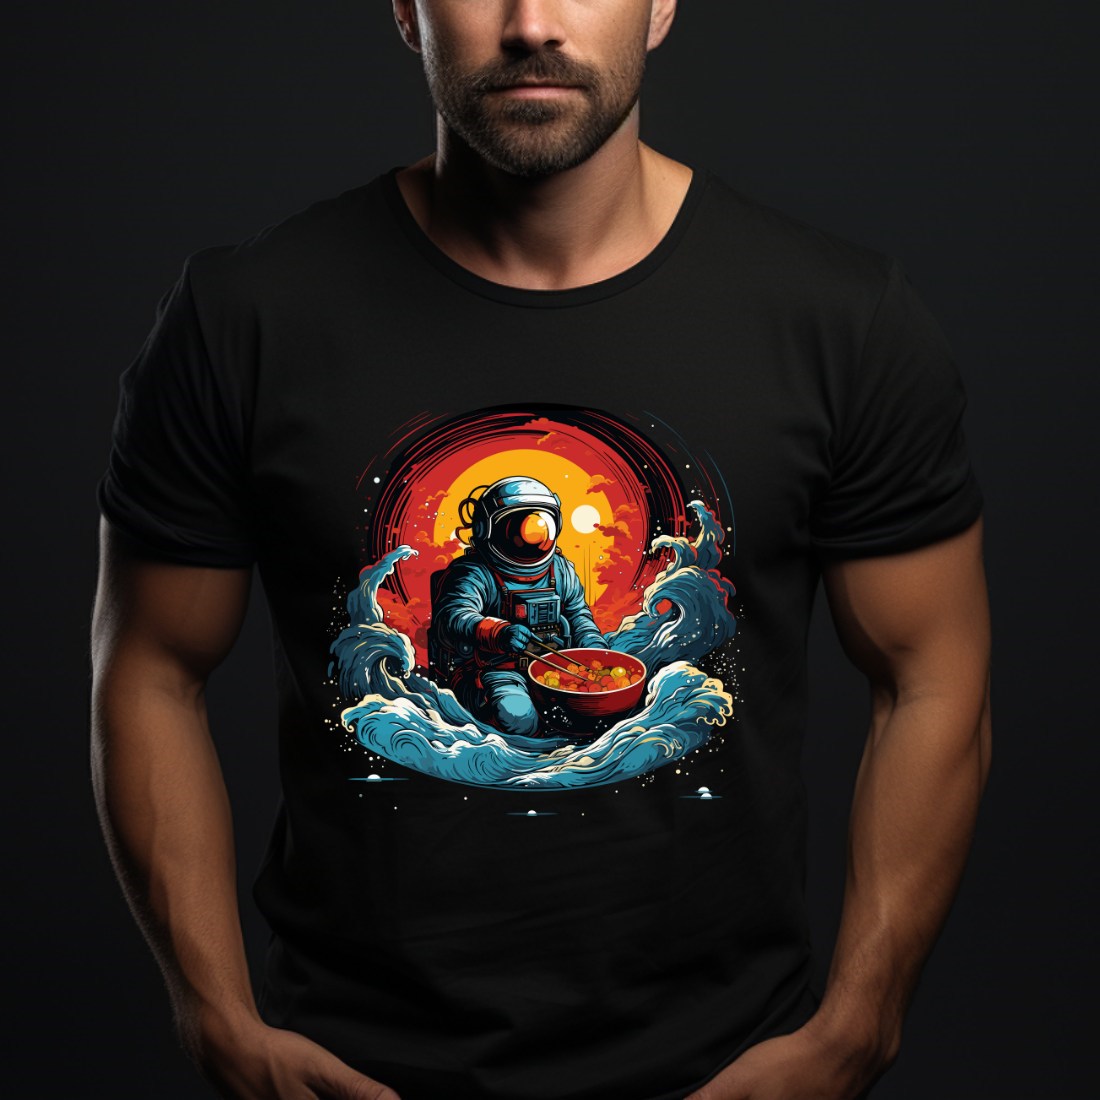 Galactic Delights: Explore Space and Flavor with our T-Shirt Astronaut Eat Ramen preview image.